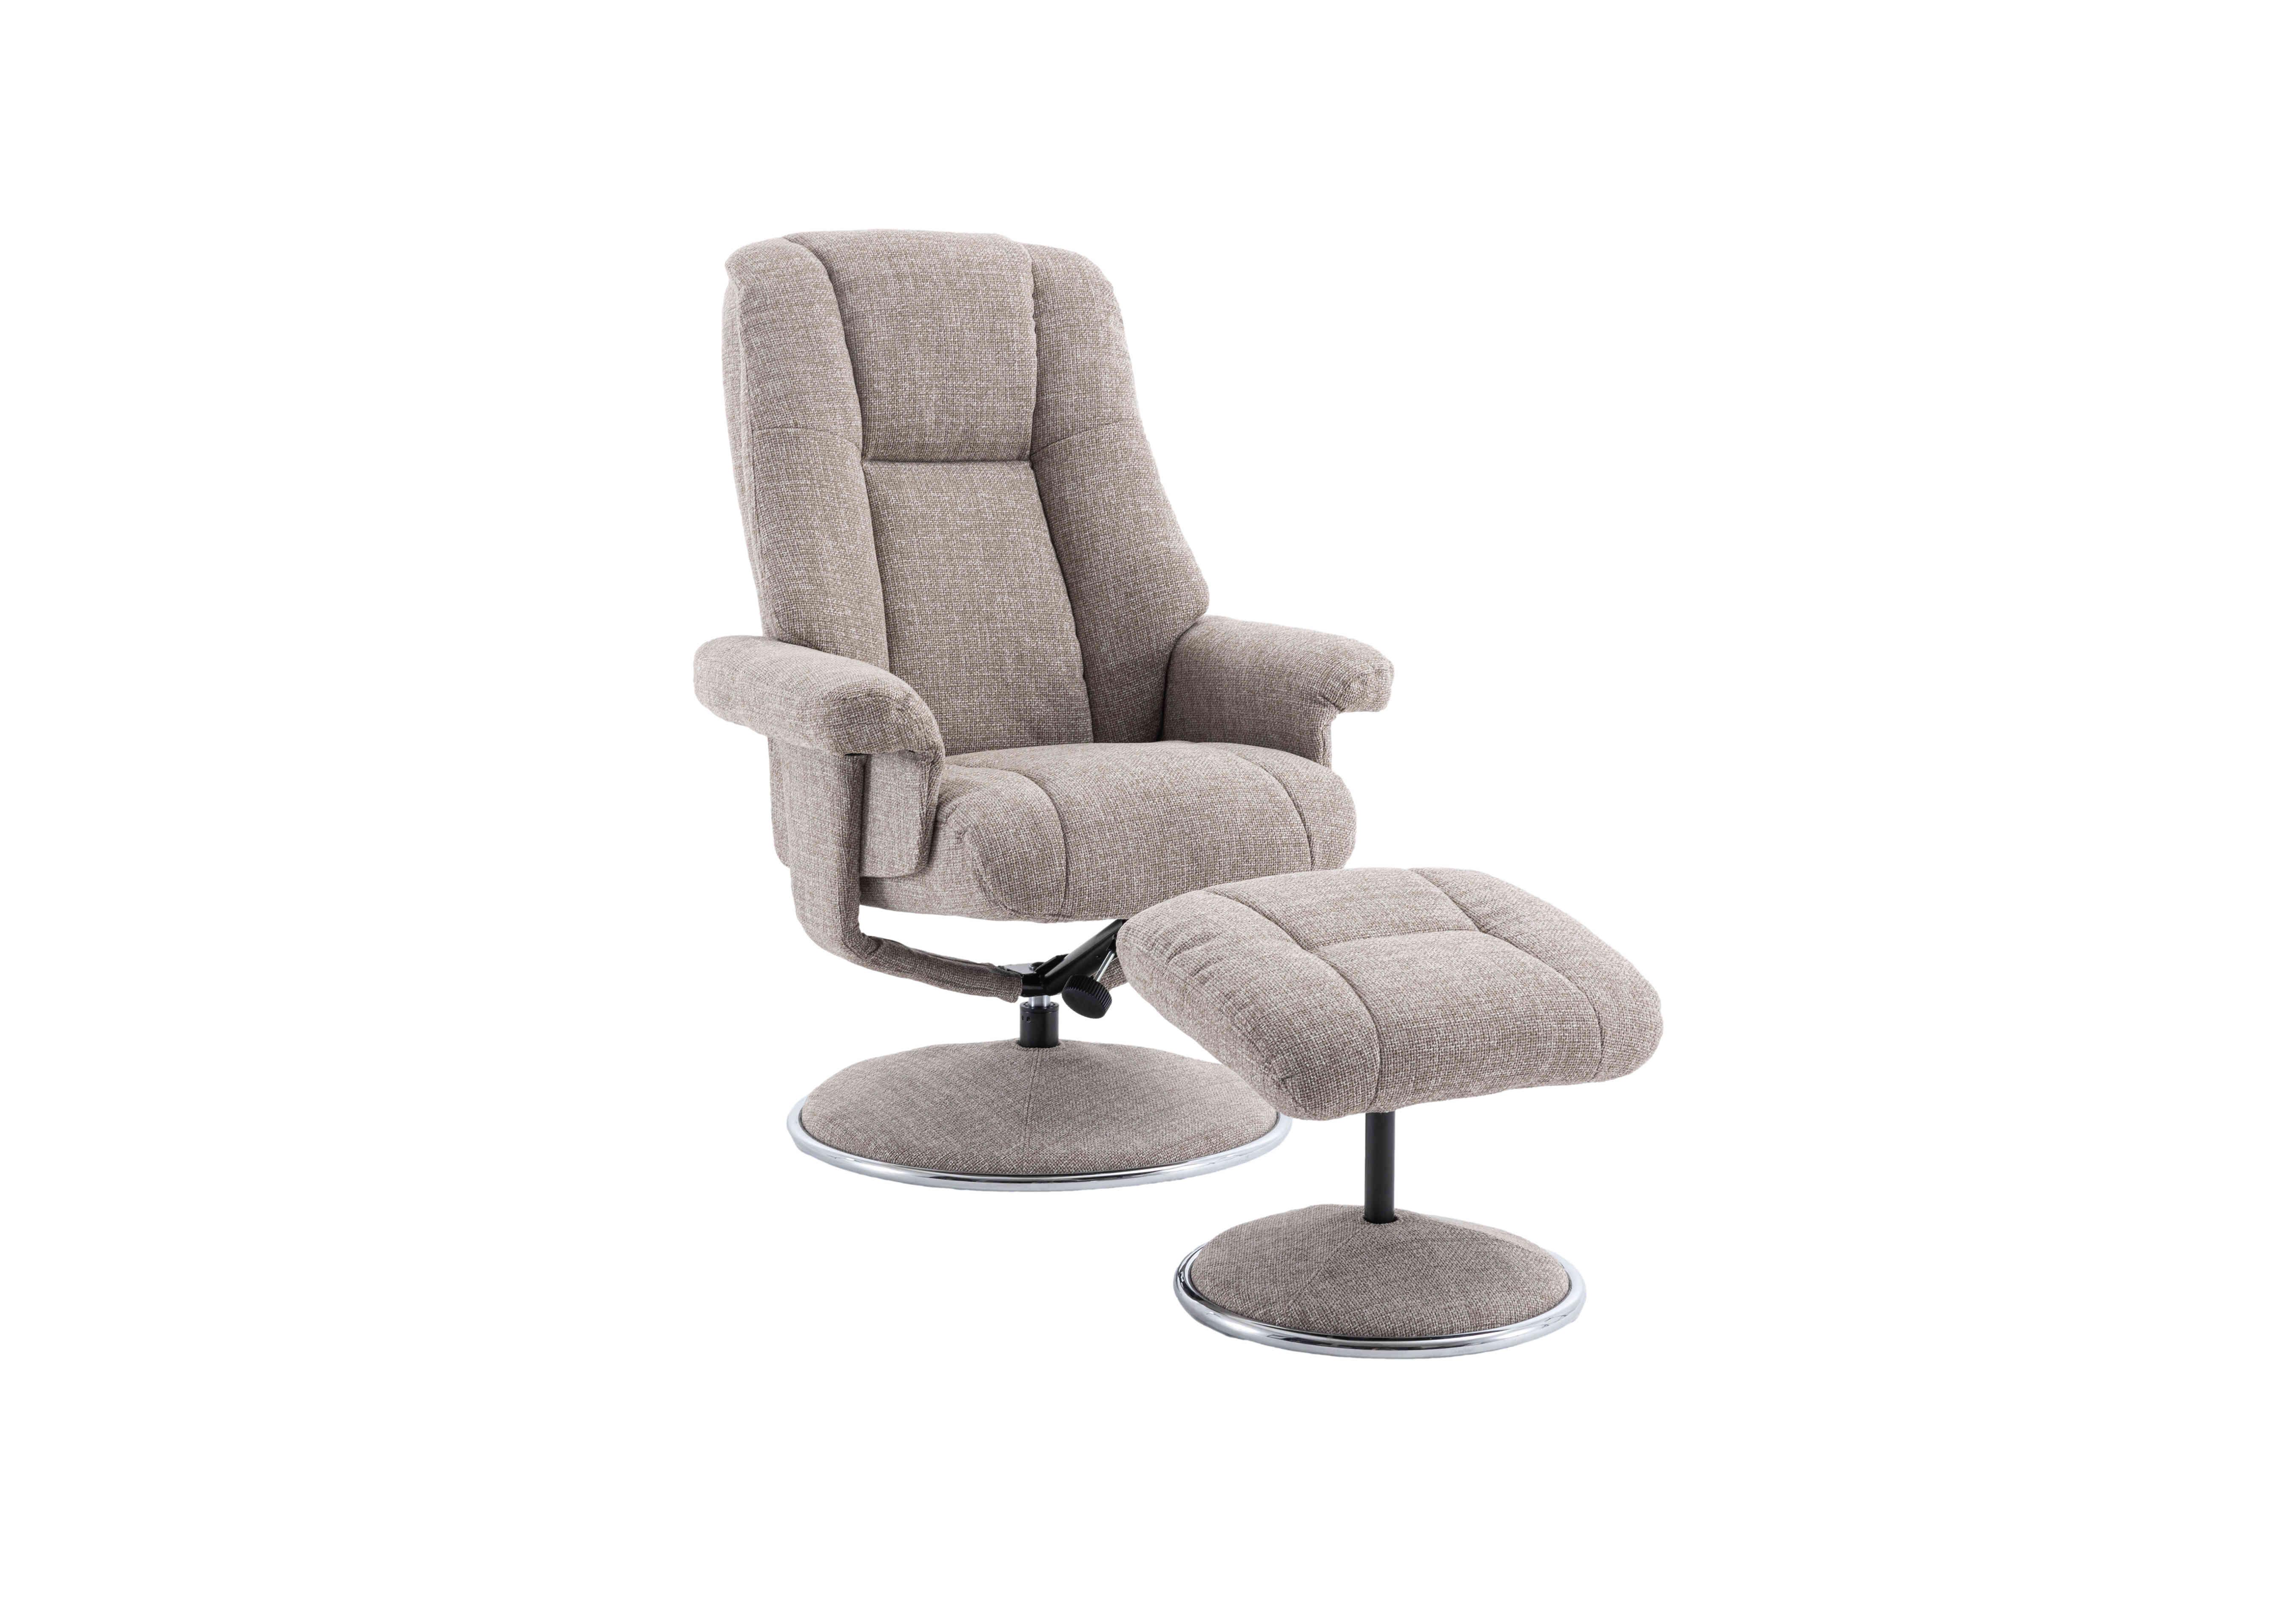 Troyes Fabric High-Back 360 Swivel Chair and Footstool in Chacha Oat on Furniture Village